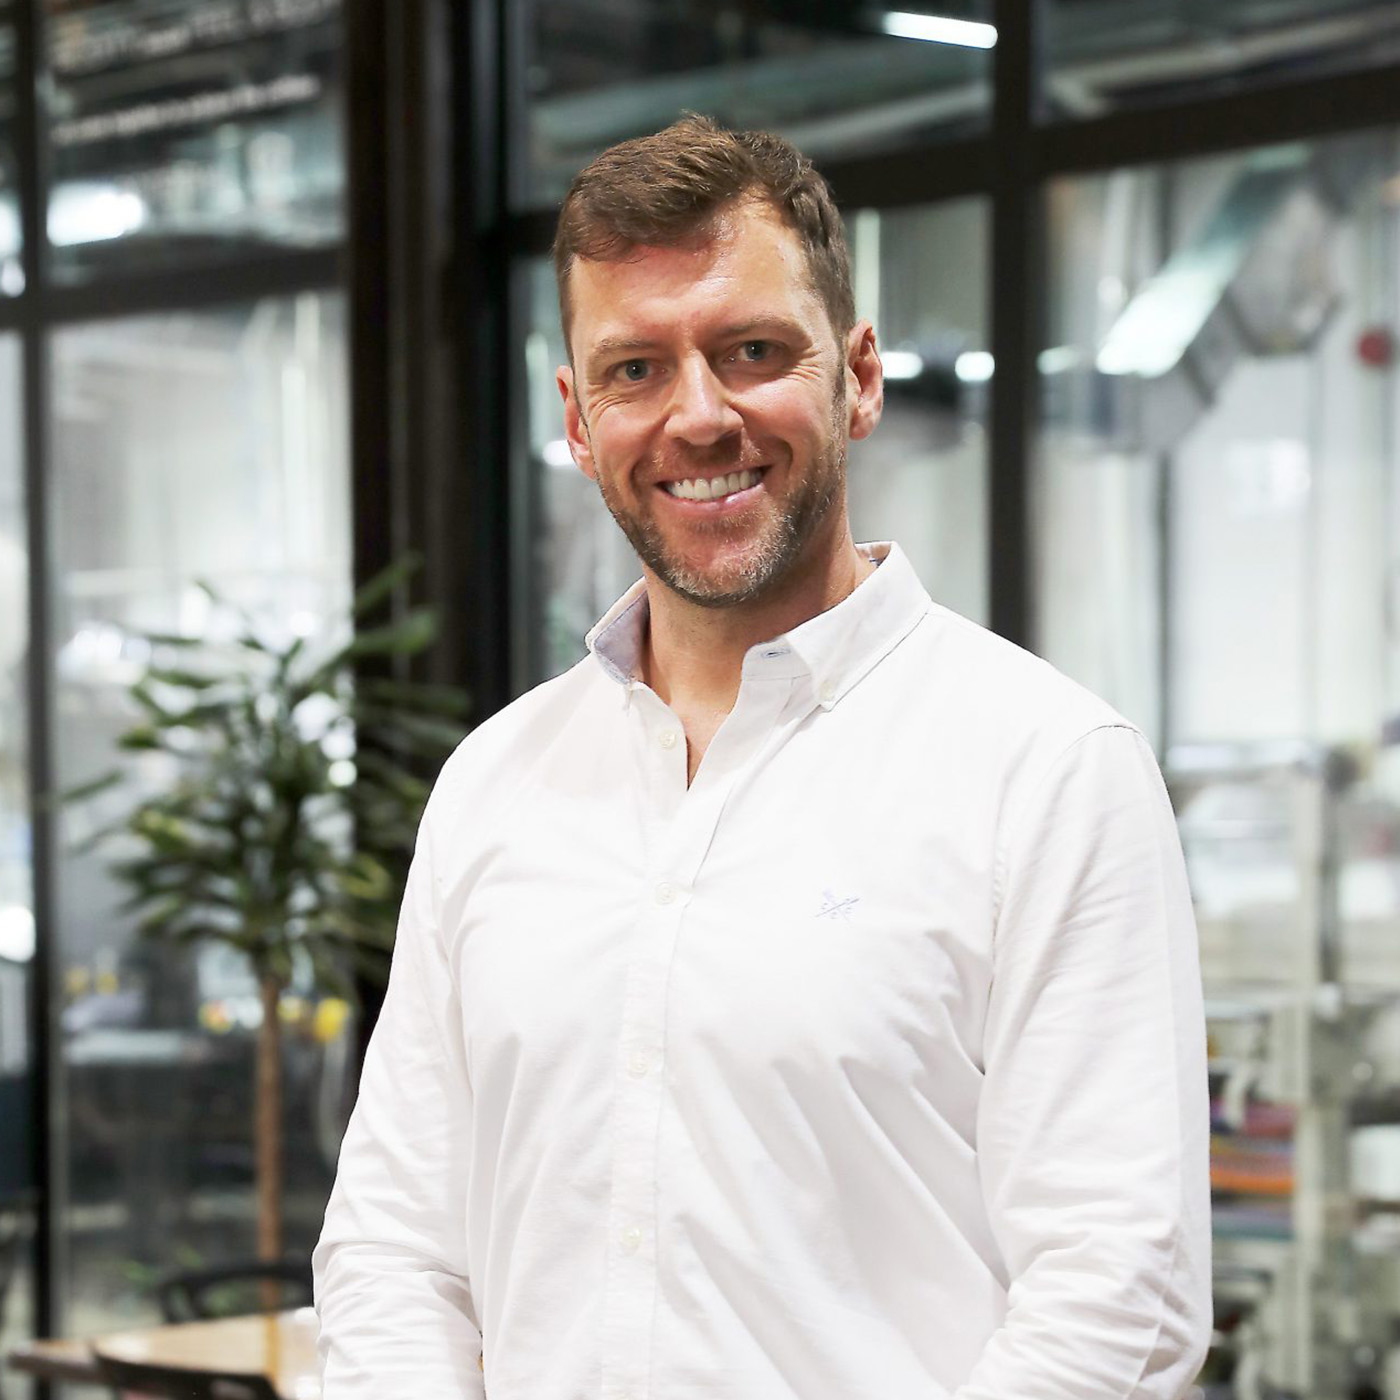 Chris Leighton, co-founder of the Dubai independent company Airzones